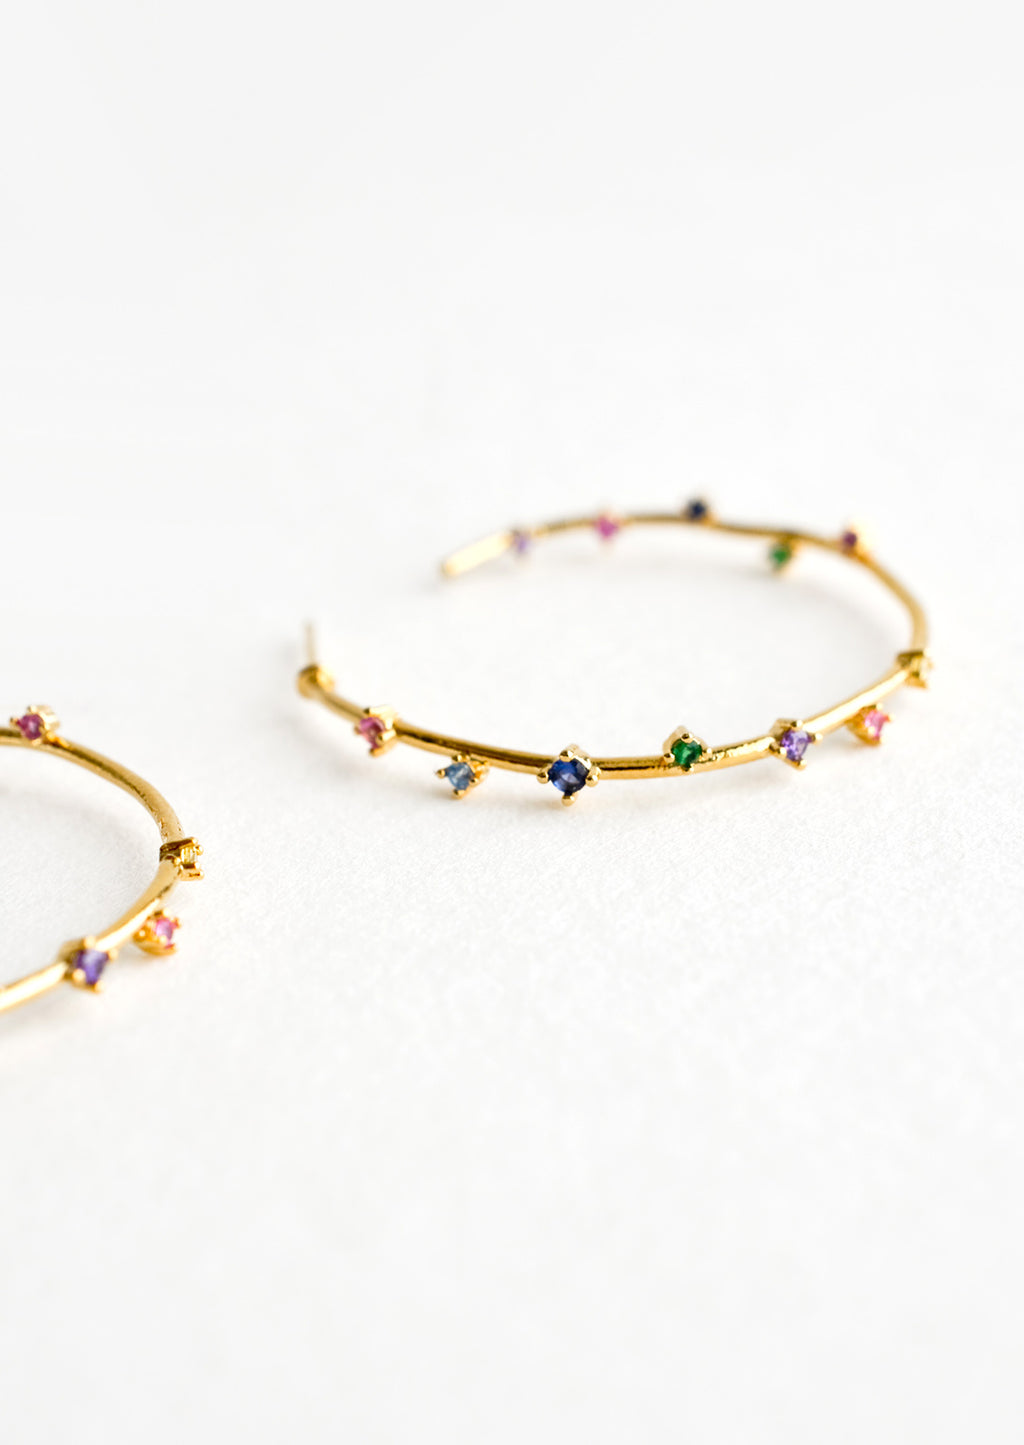 2: A pair of gold hoop earrings with colored crystals wrapping around the hoop sporadically.